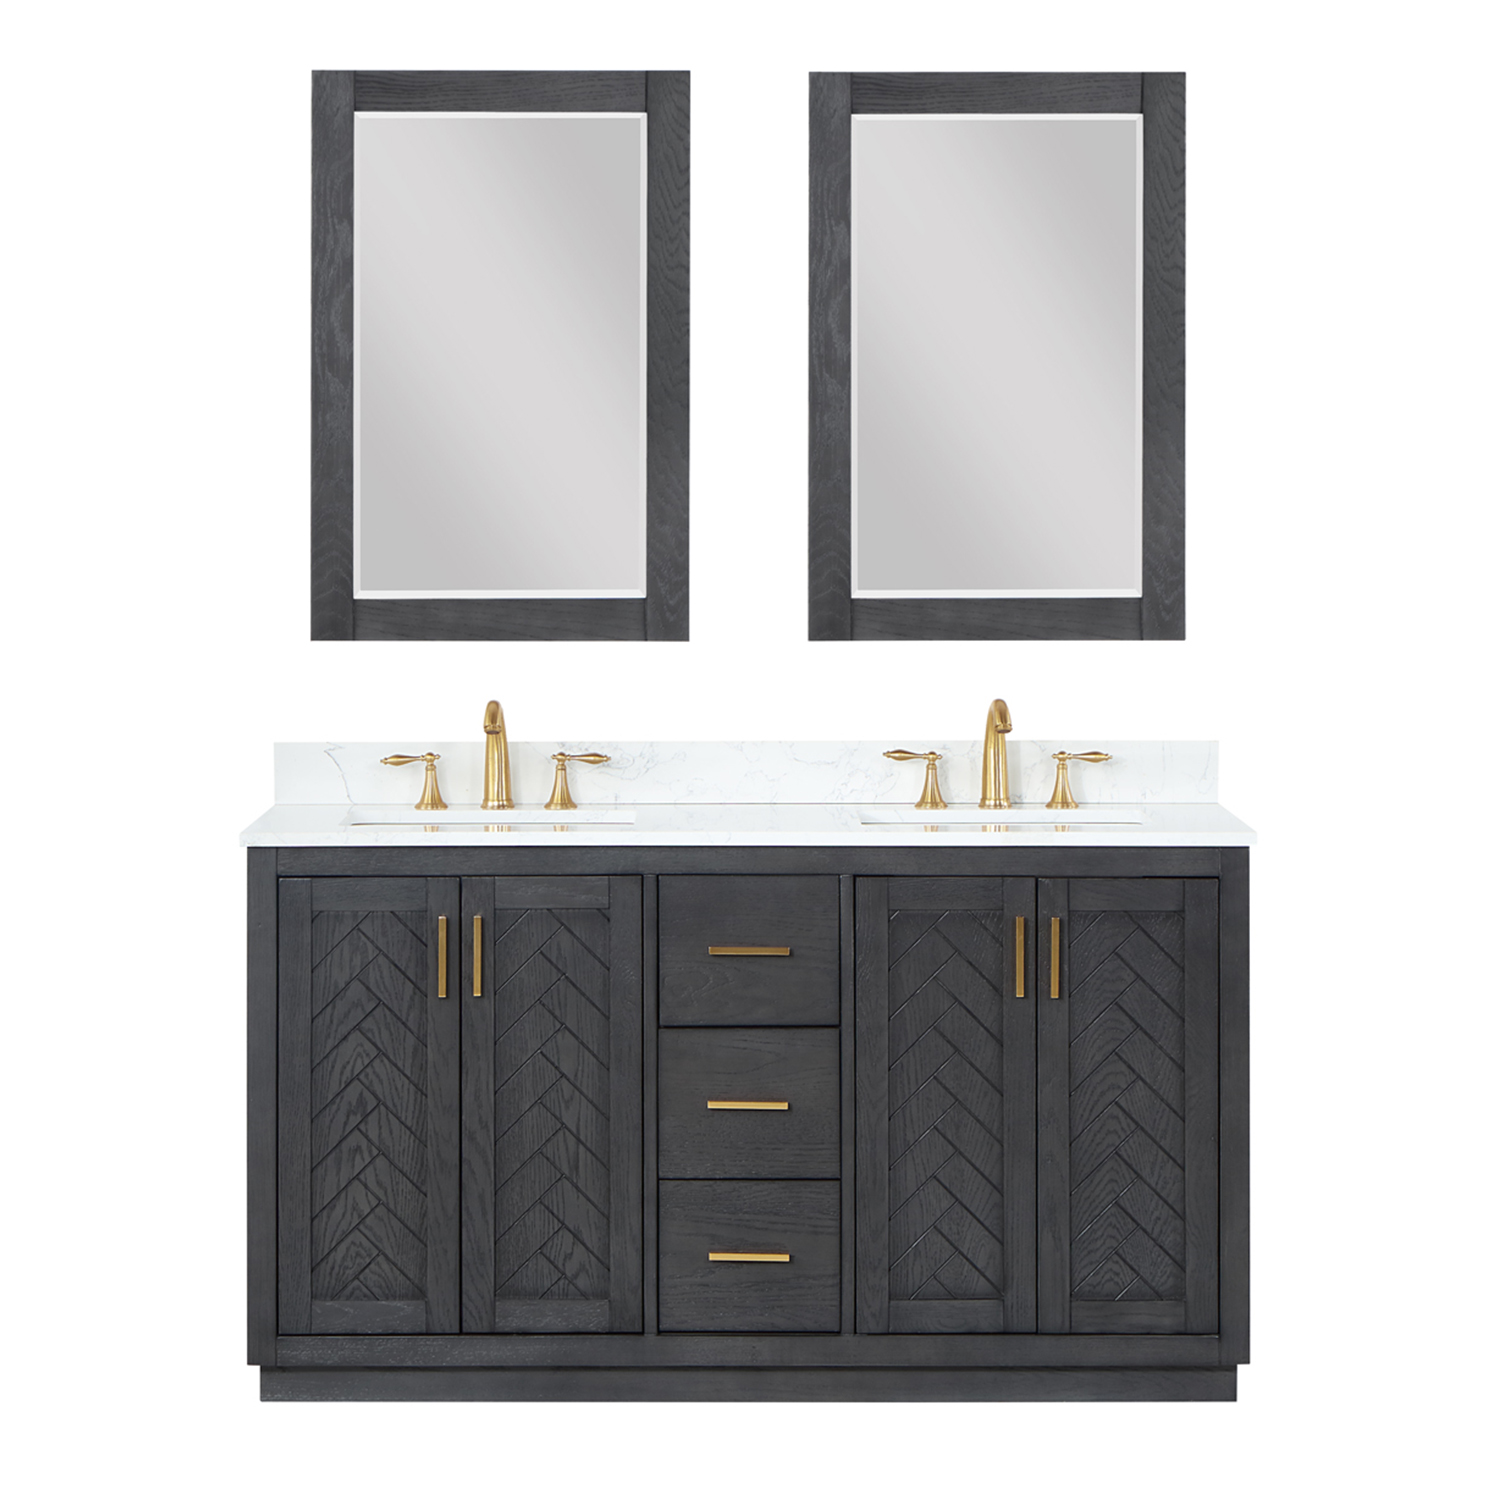 Issac Edwards Collection 72" Double Bathroom Vanity Set in Classic Blue with Grain White Composite Stone Countertop without Mirror